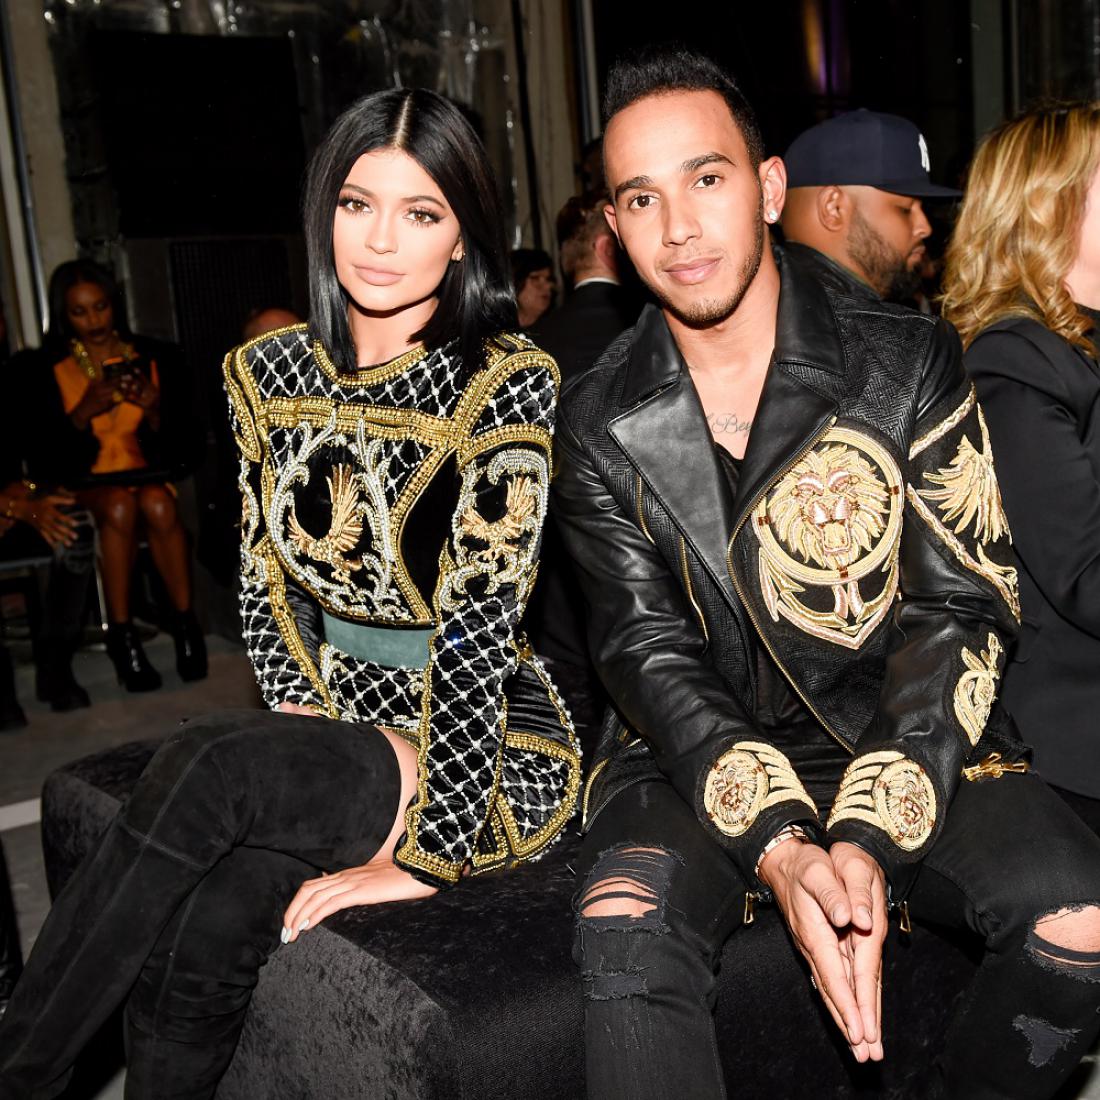 Kylie Jenner in Lewis Hamilton